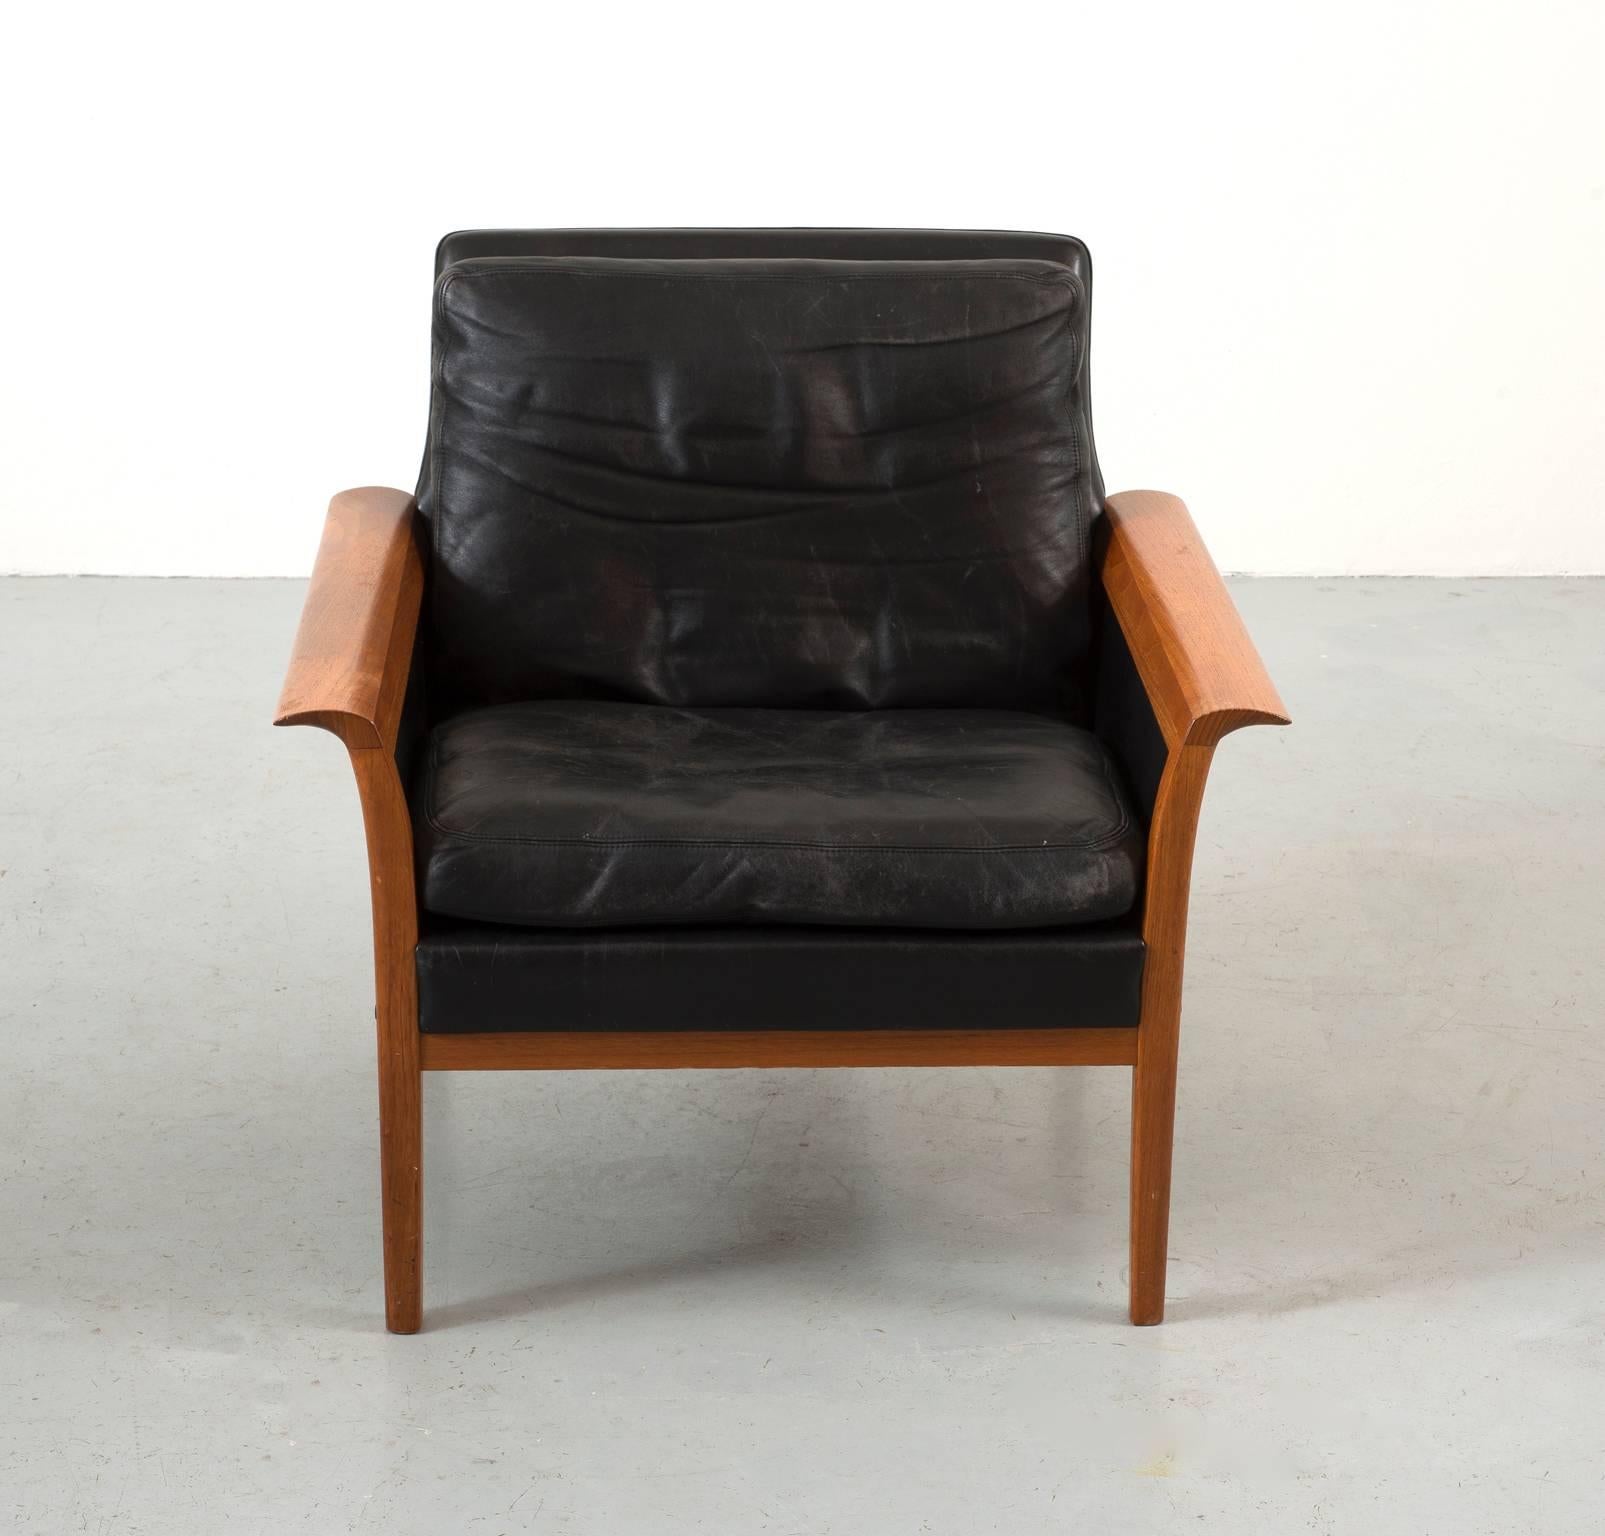 Teak and leather lounge chair by Hans Olsen, Denmark, 1960s.